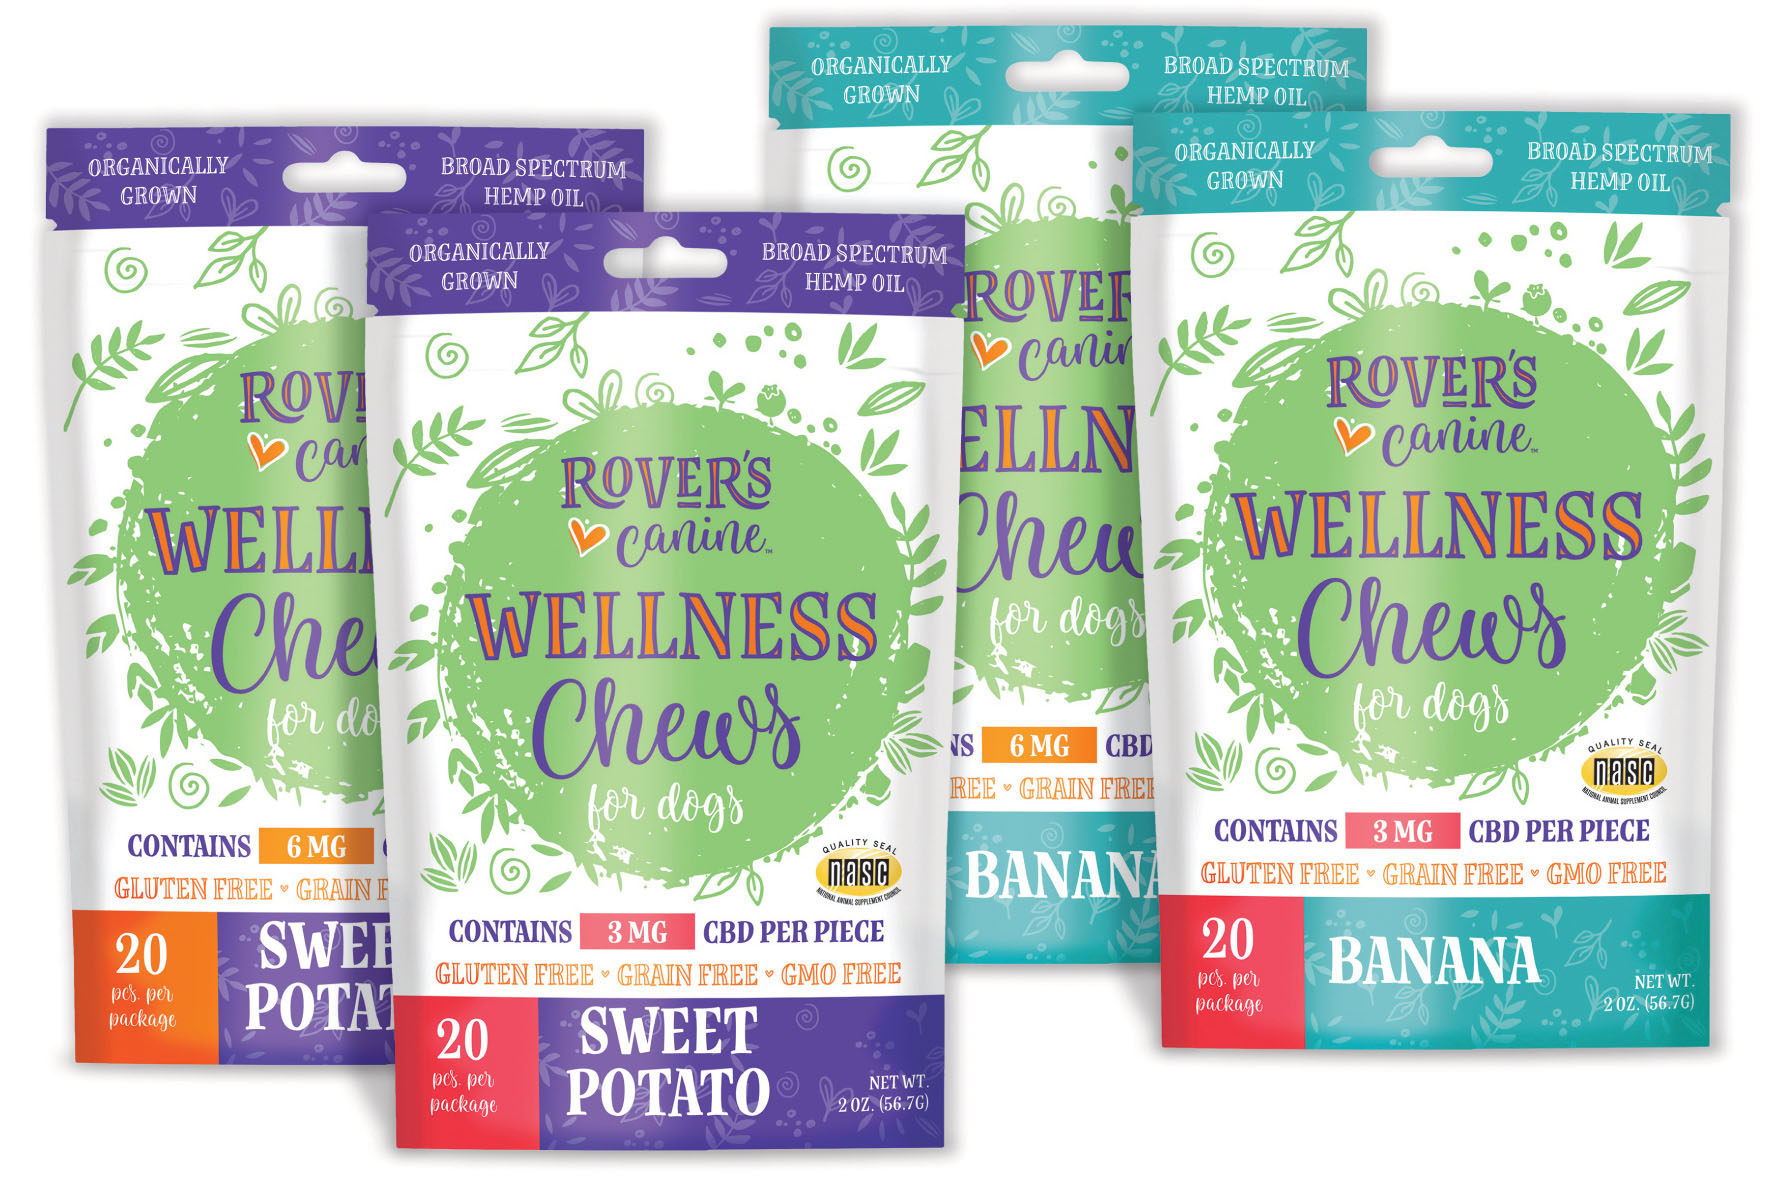 Rover’s Wellness’ Broad Spectrum Hemp Chews for dogs are infused with broad-spectrum hemp oil and include naturally occurring CBD.